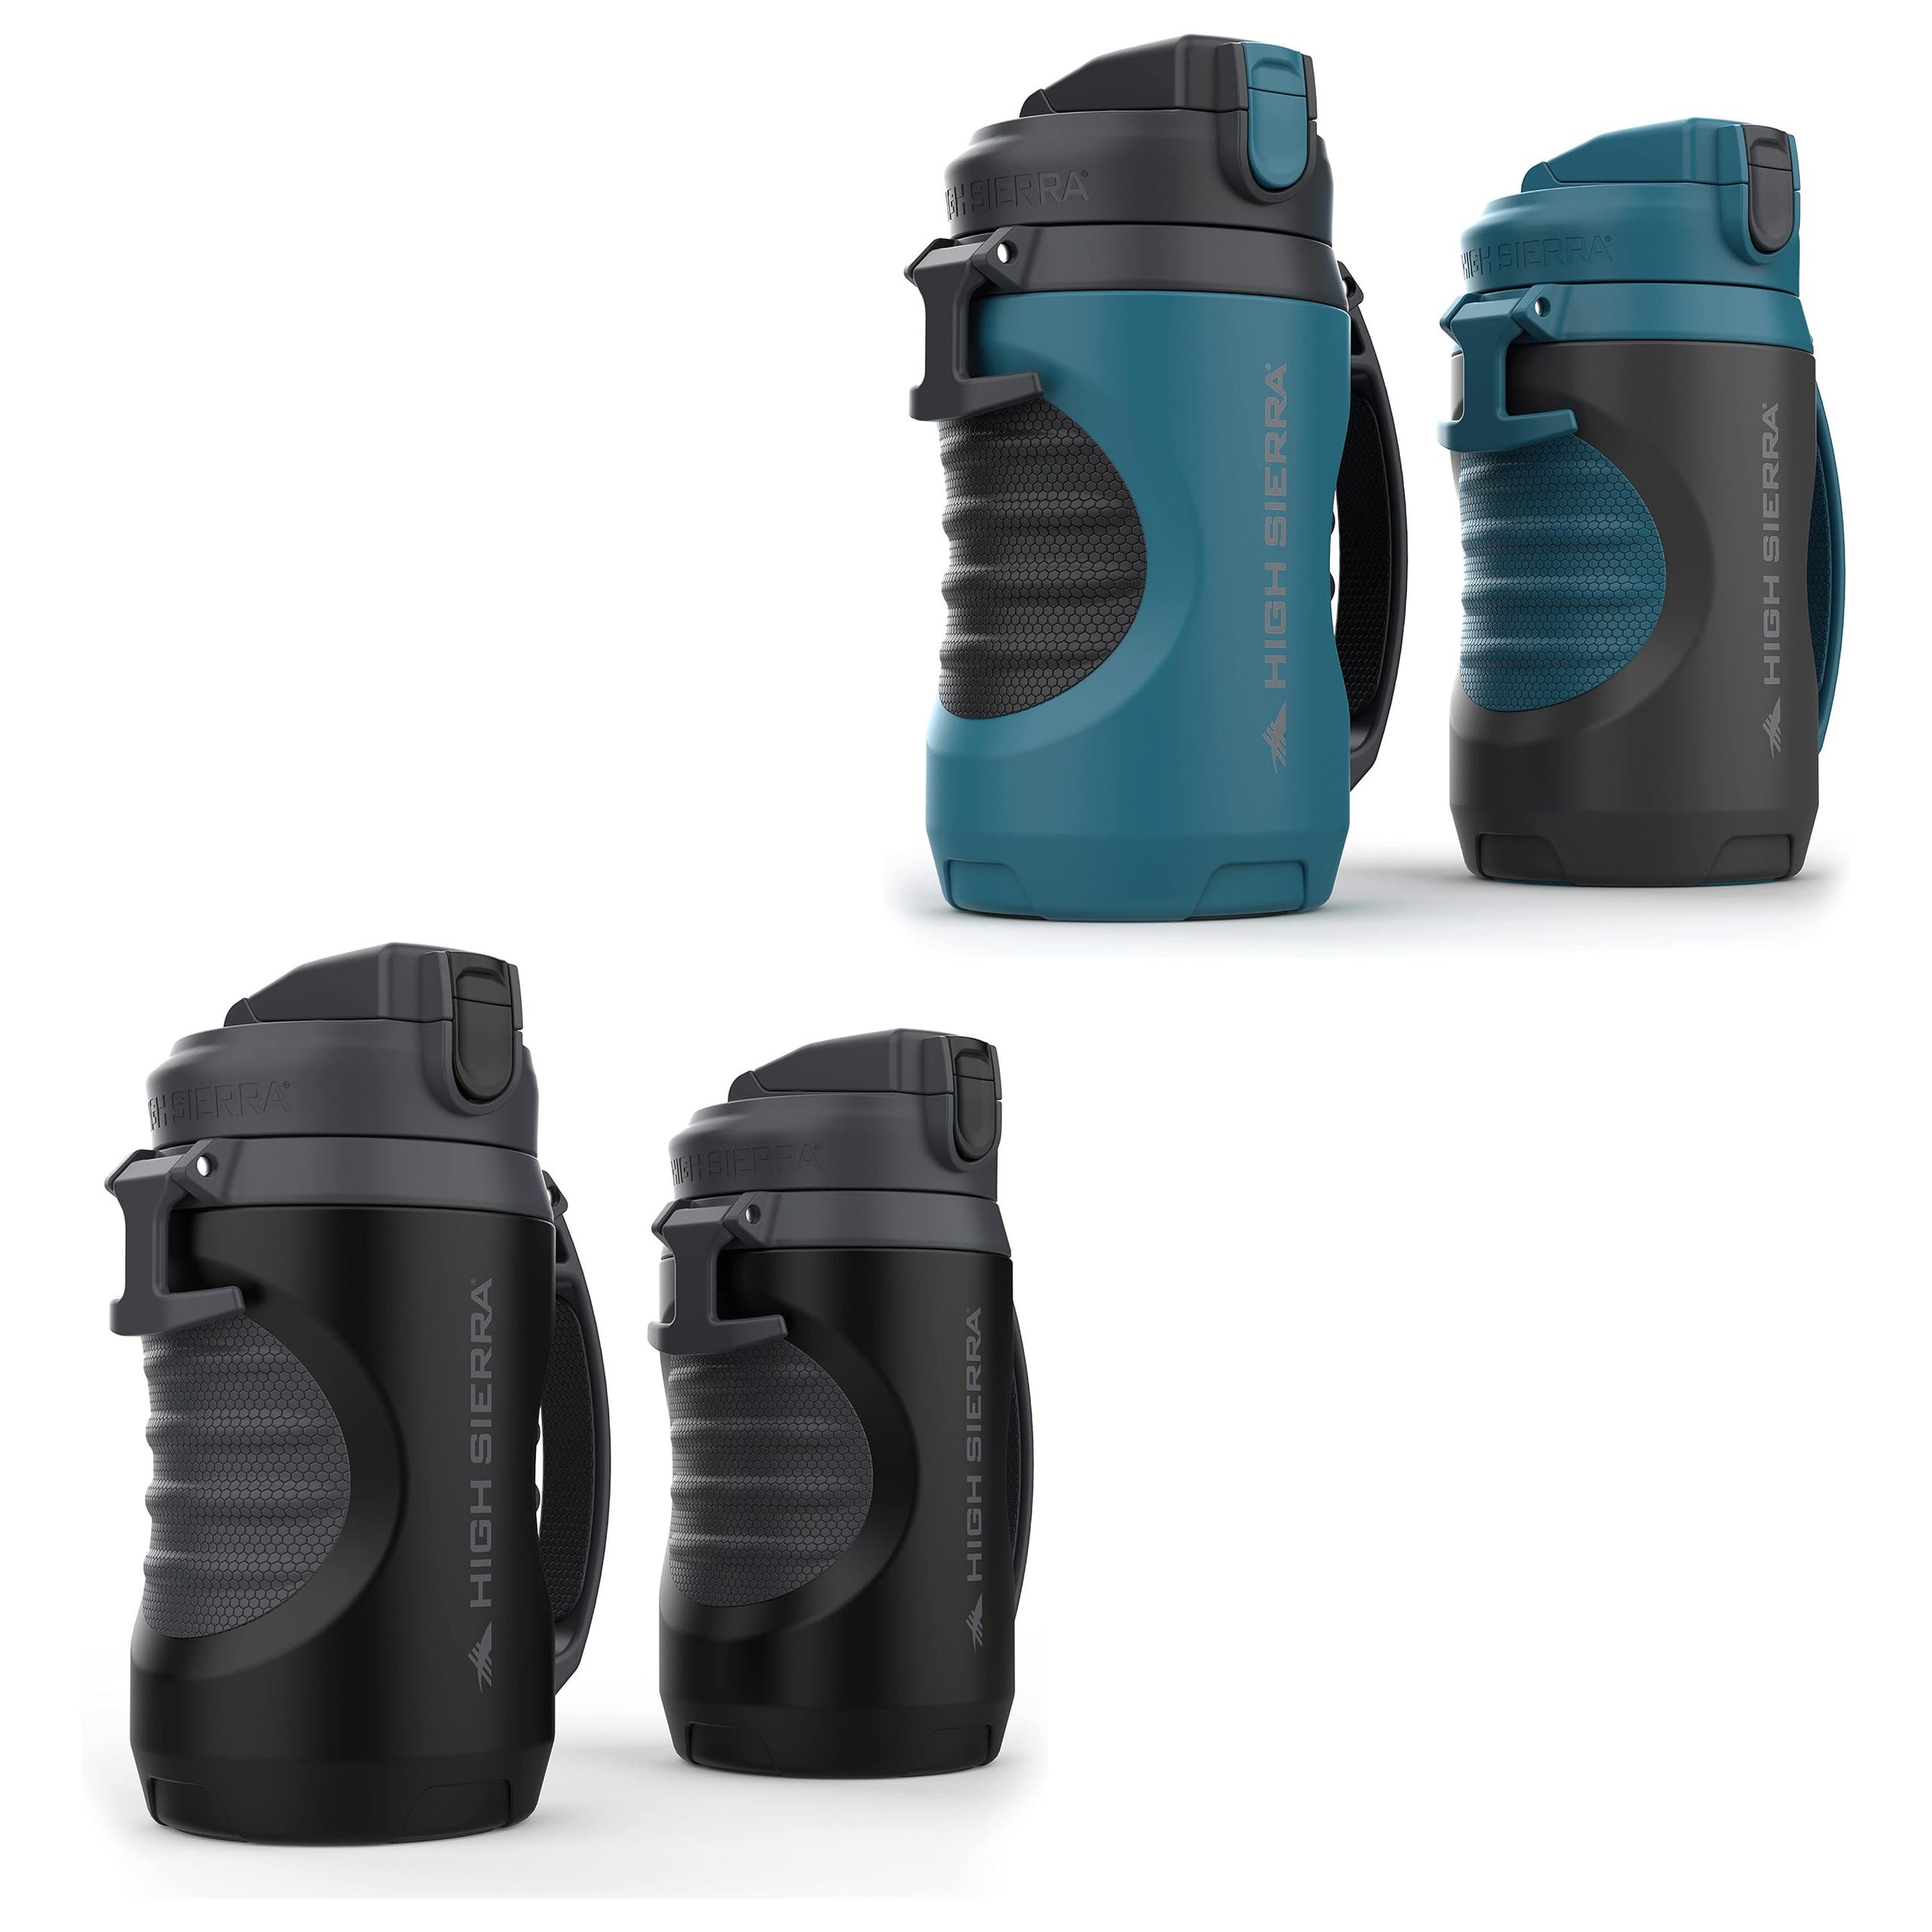 Four black and teal insulated drinkware containers with lids and handles, differing in size and design.